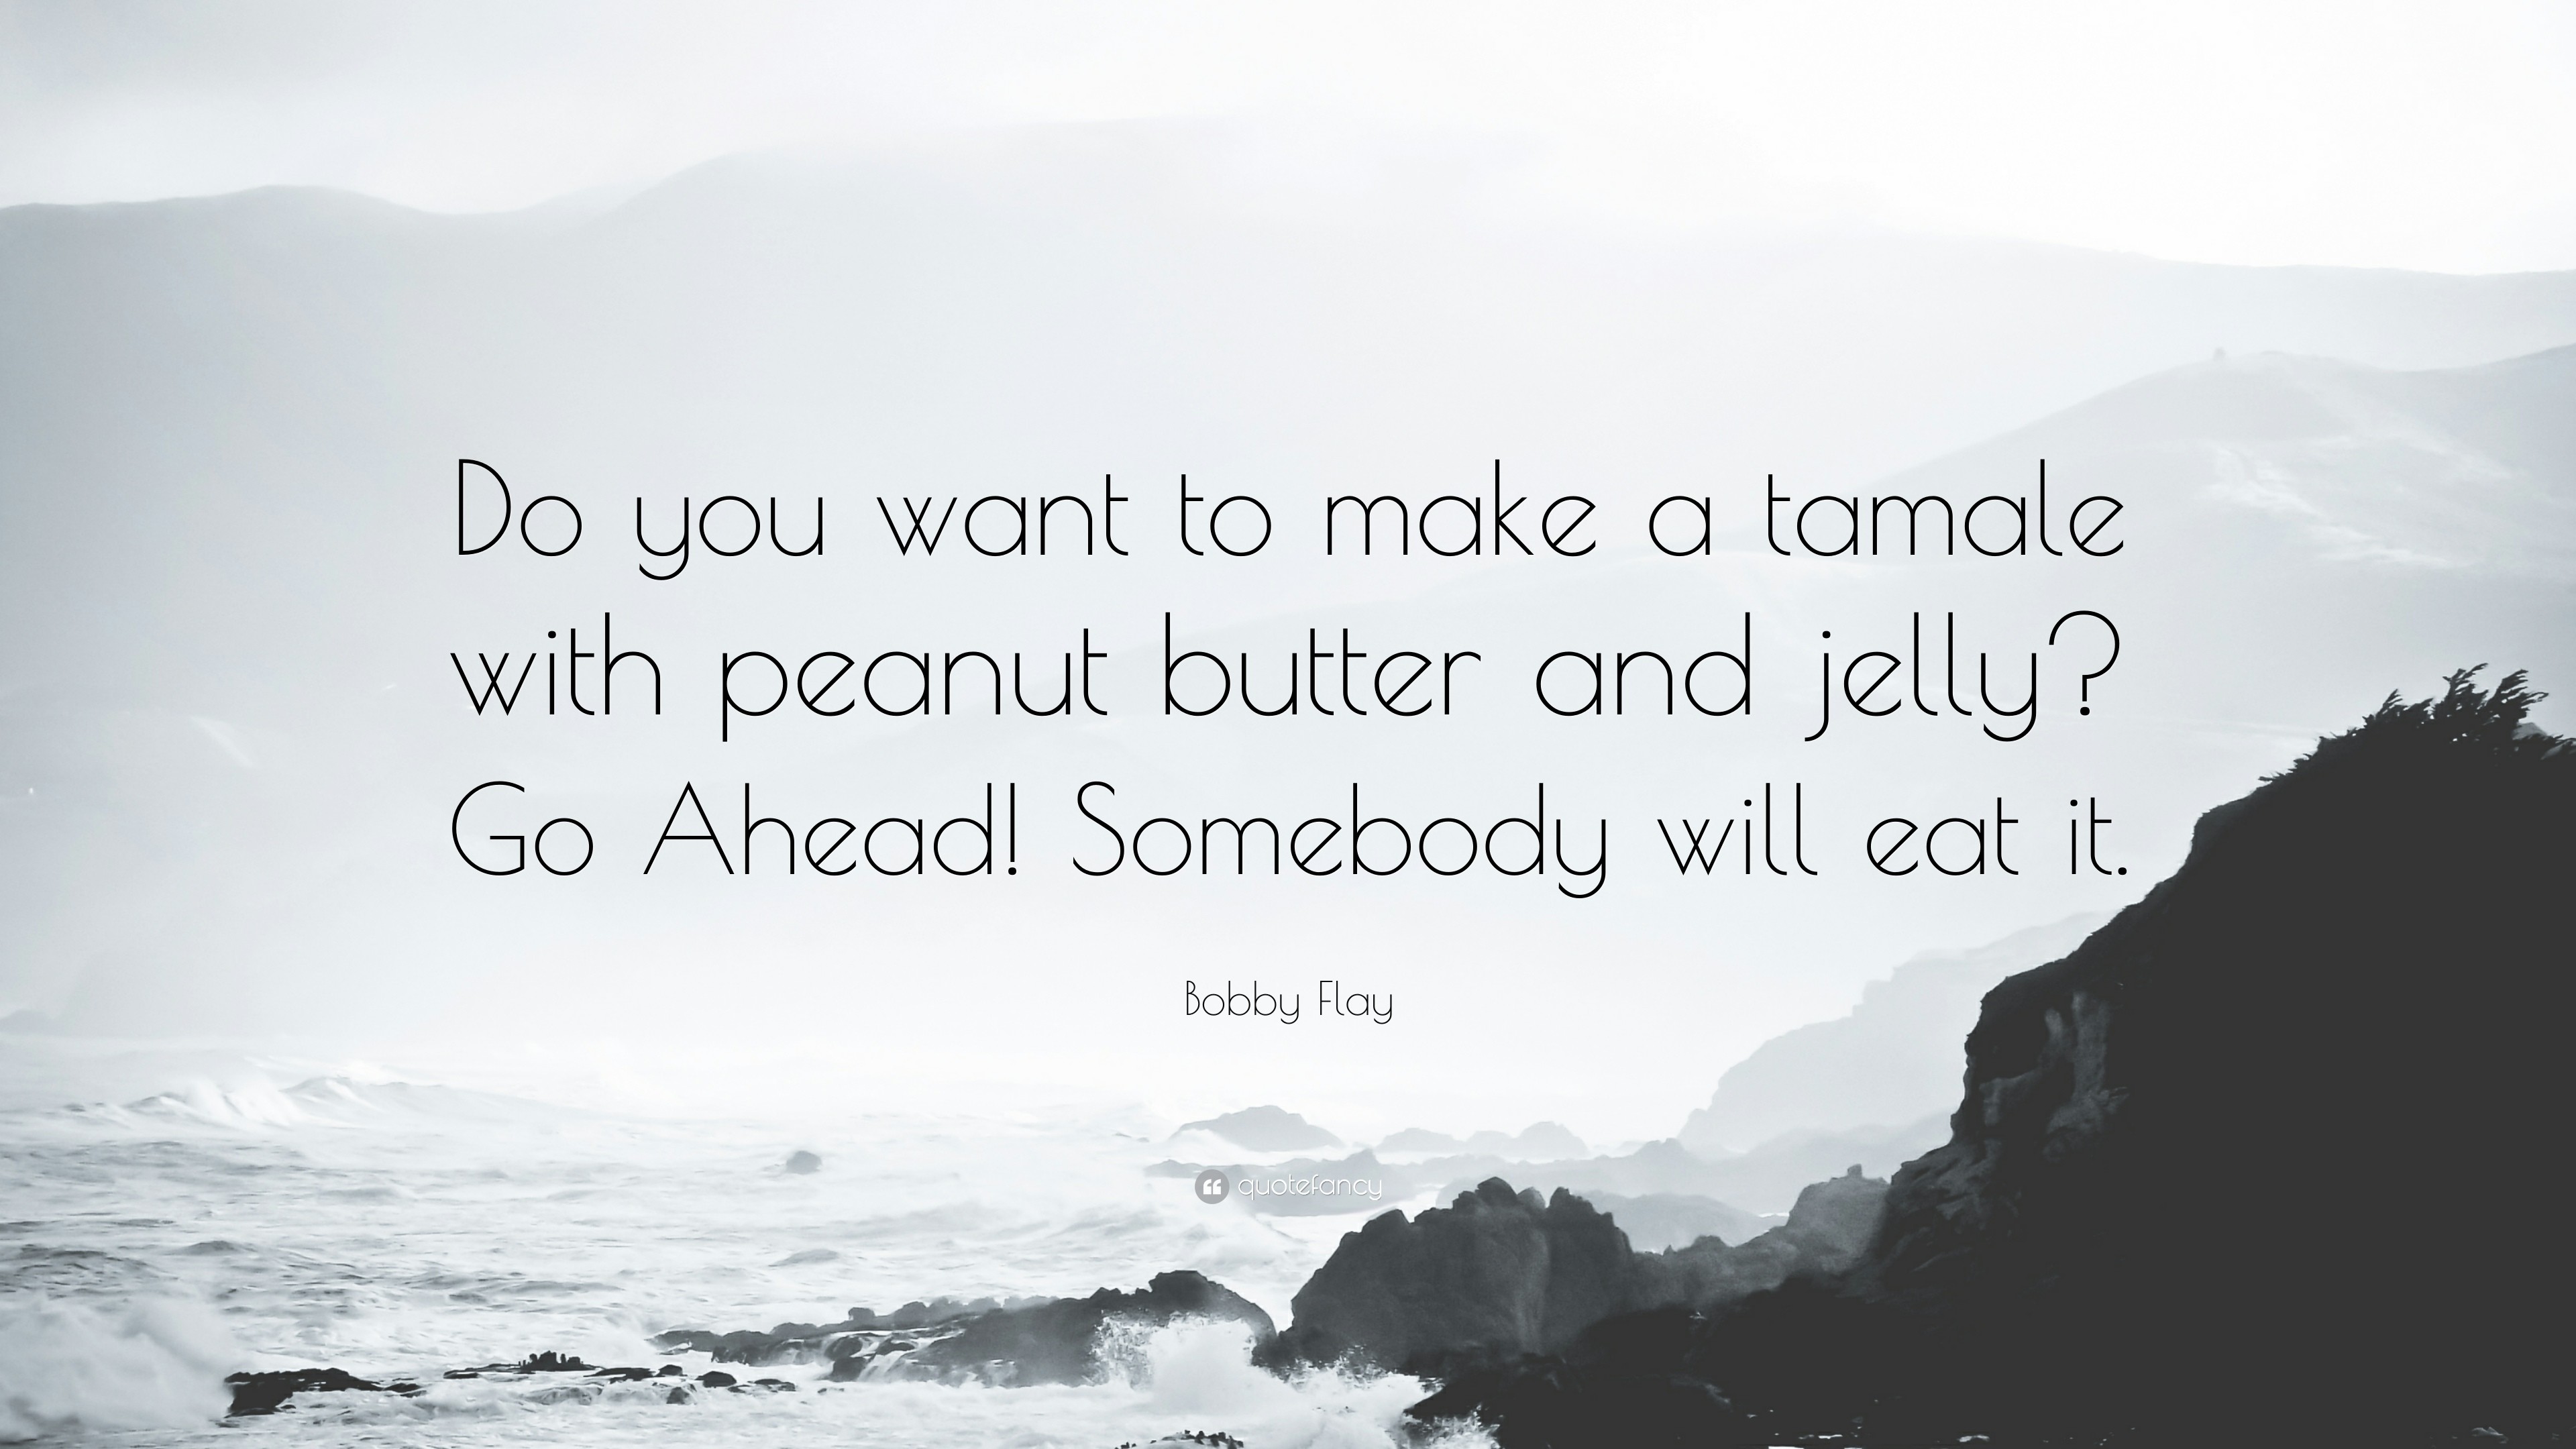 3840x2160 Bobby Flay Quote: “Do you want to make a tamale with peanut butter and